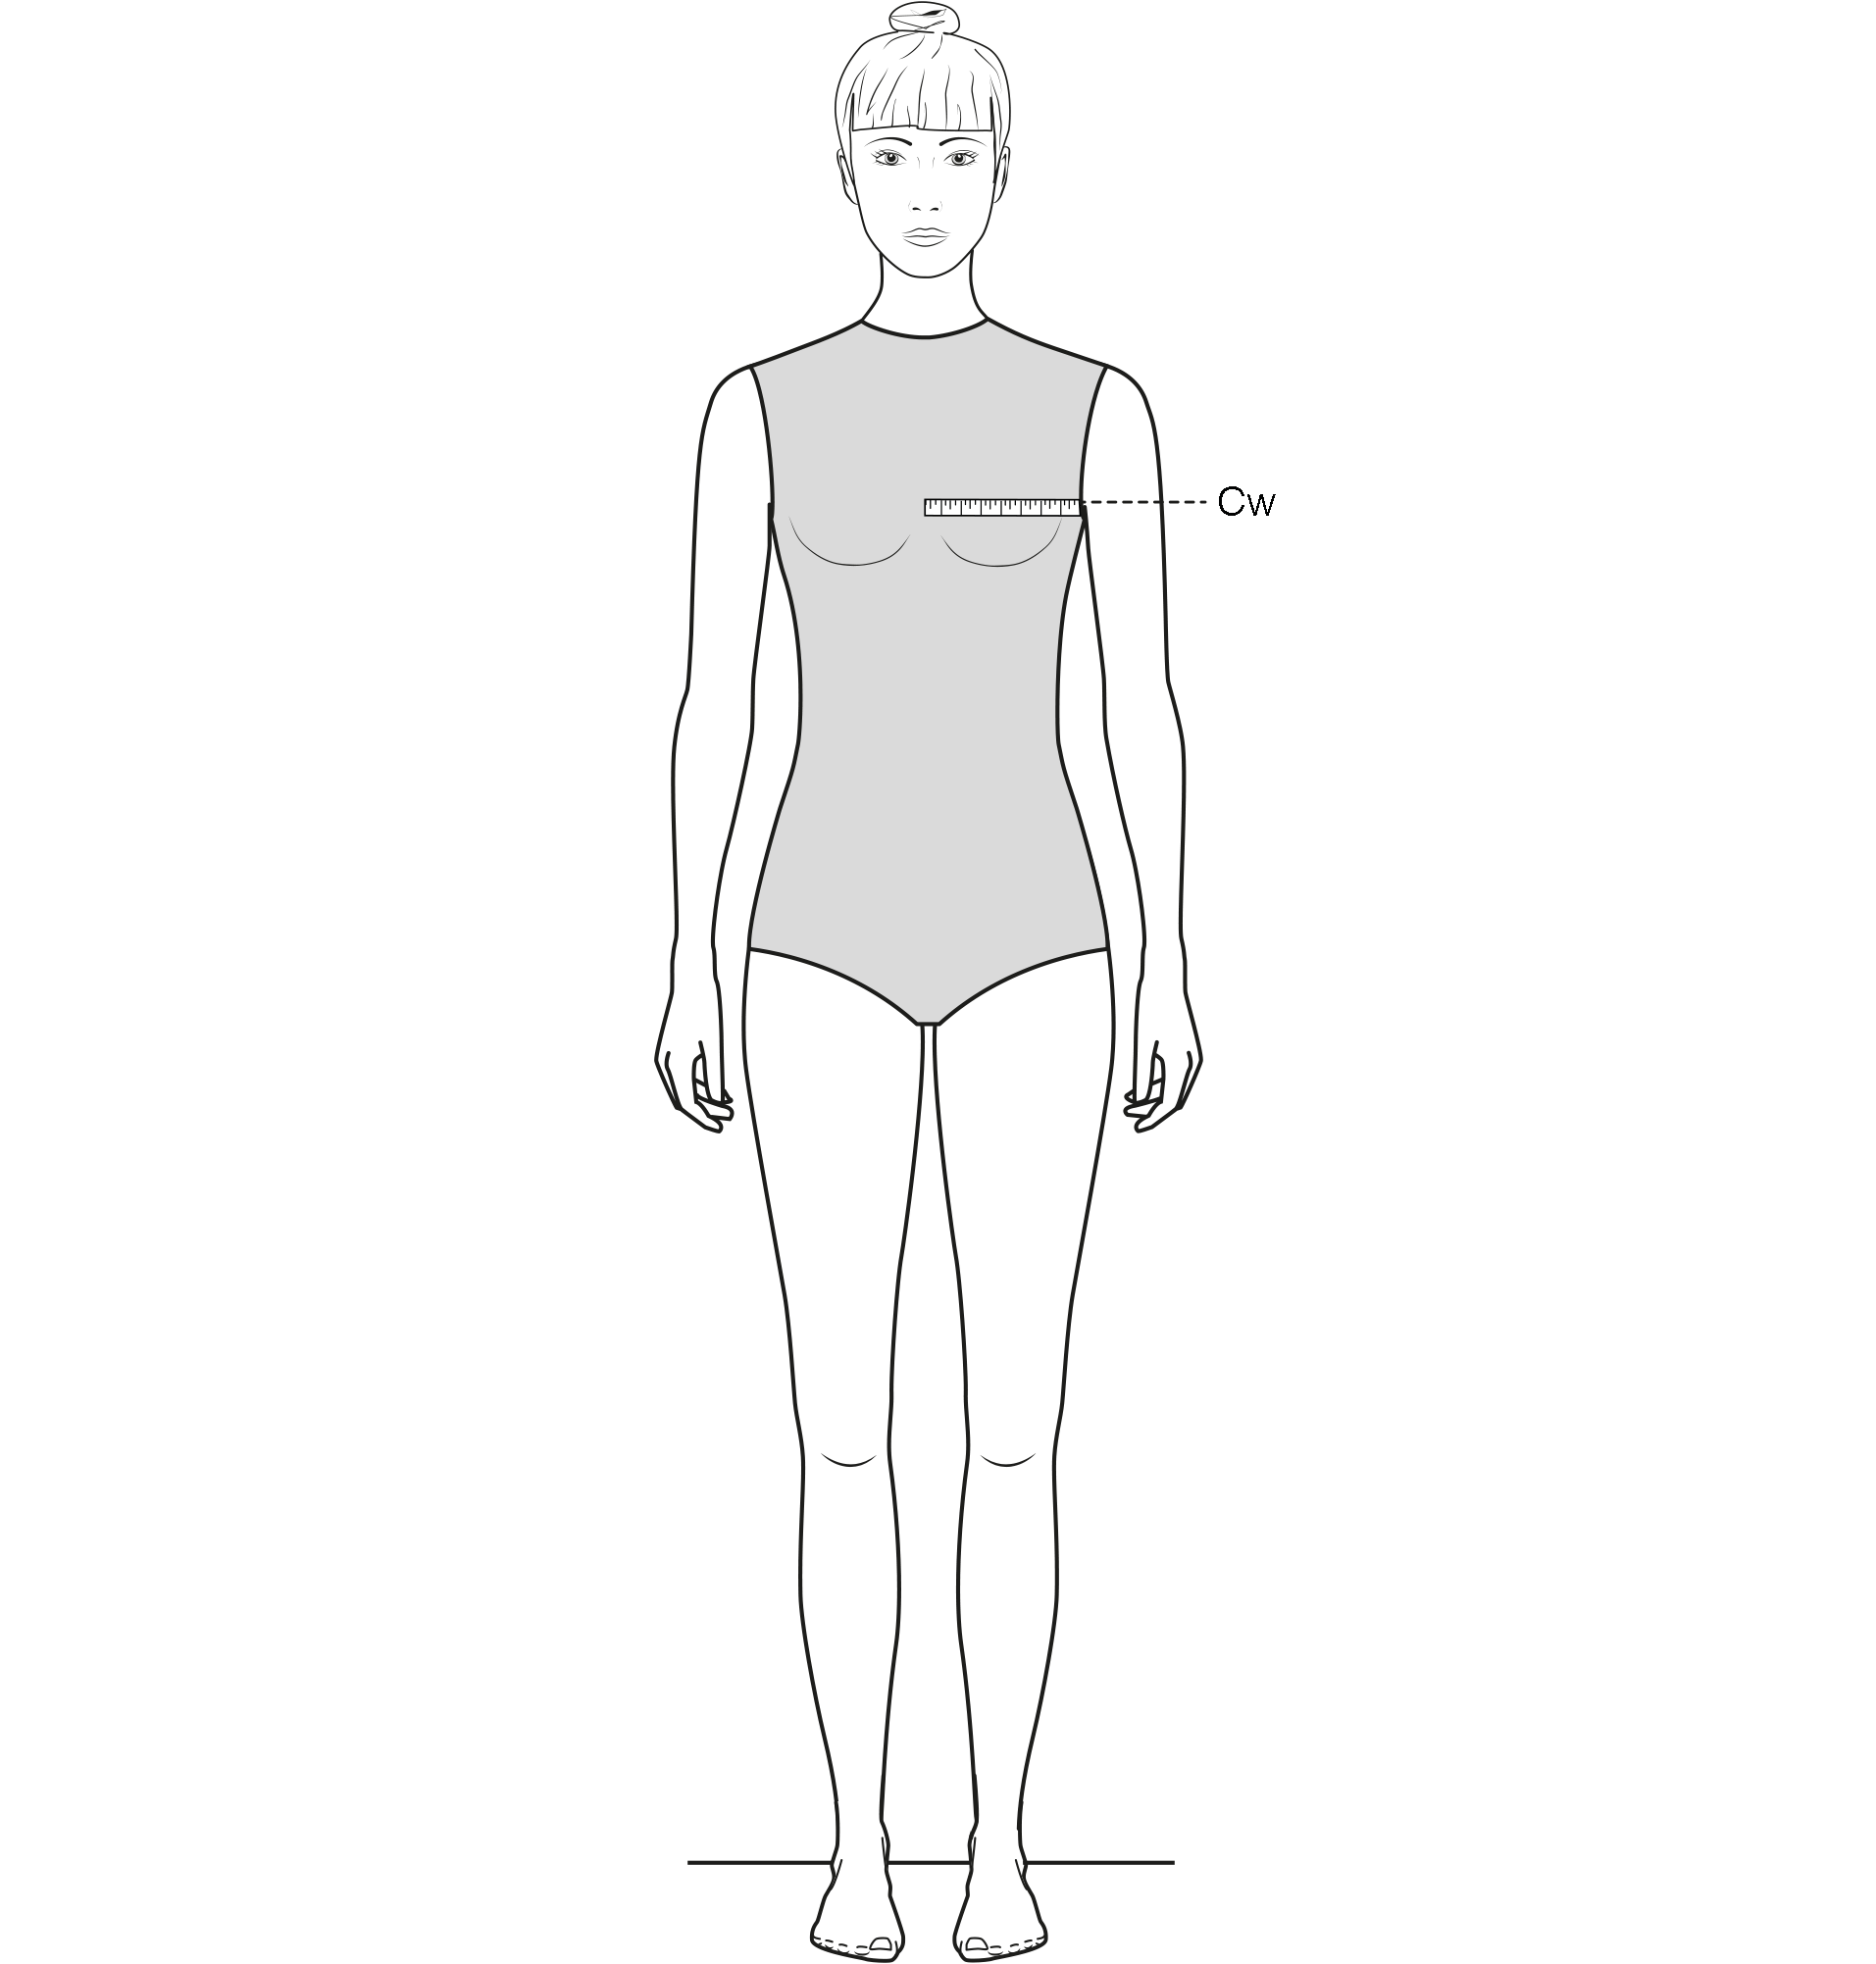 This figure shows the measurement of the Chest width